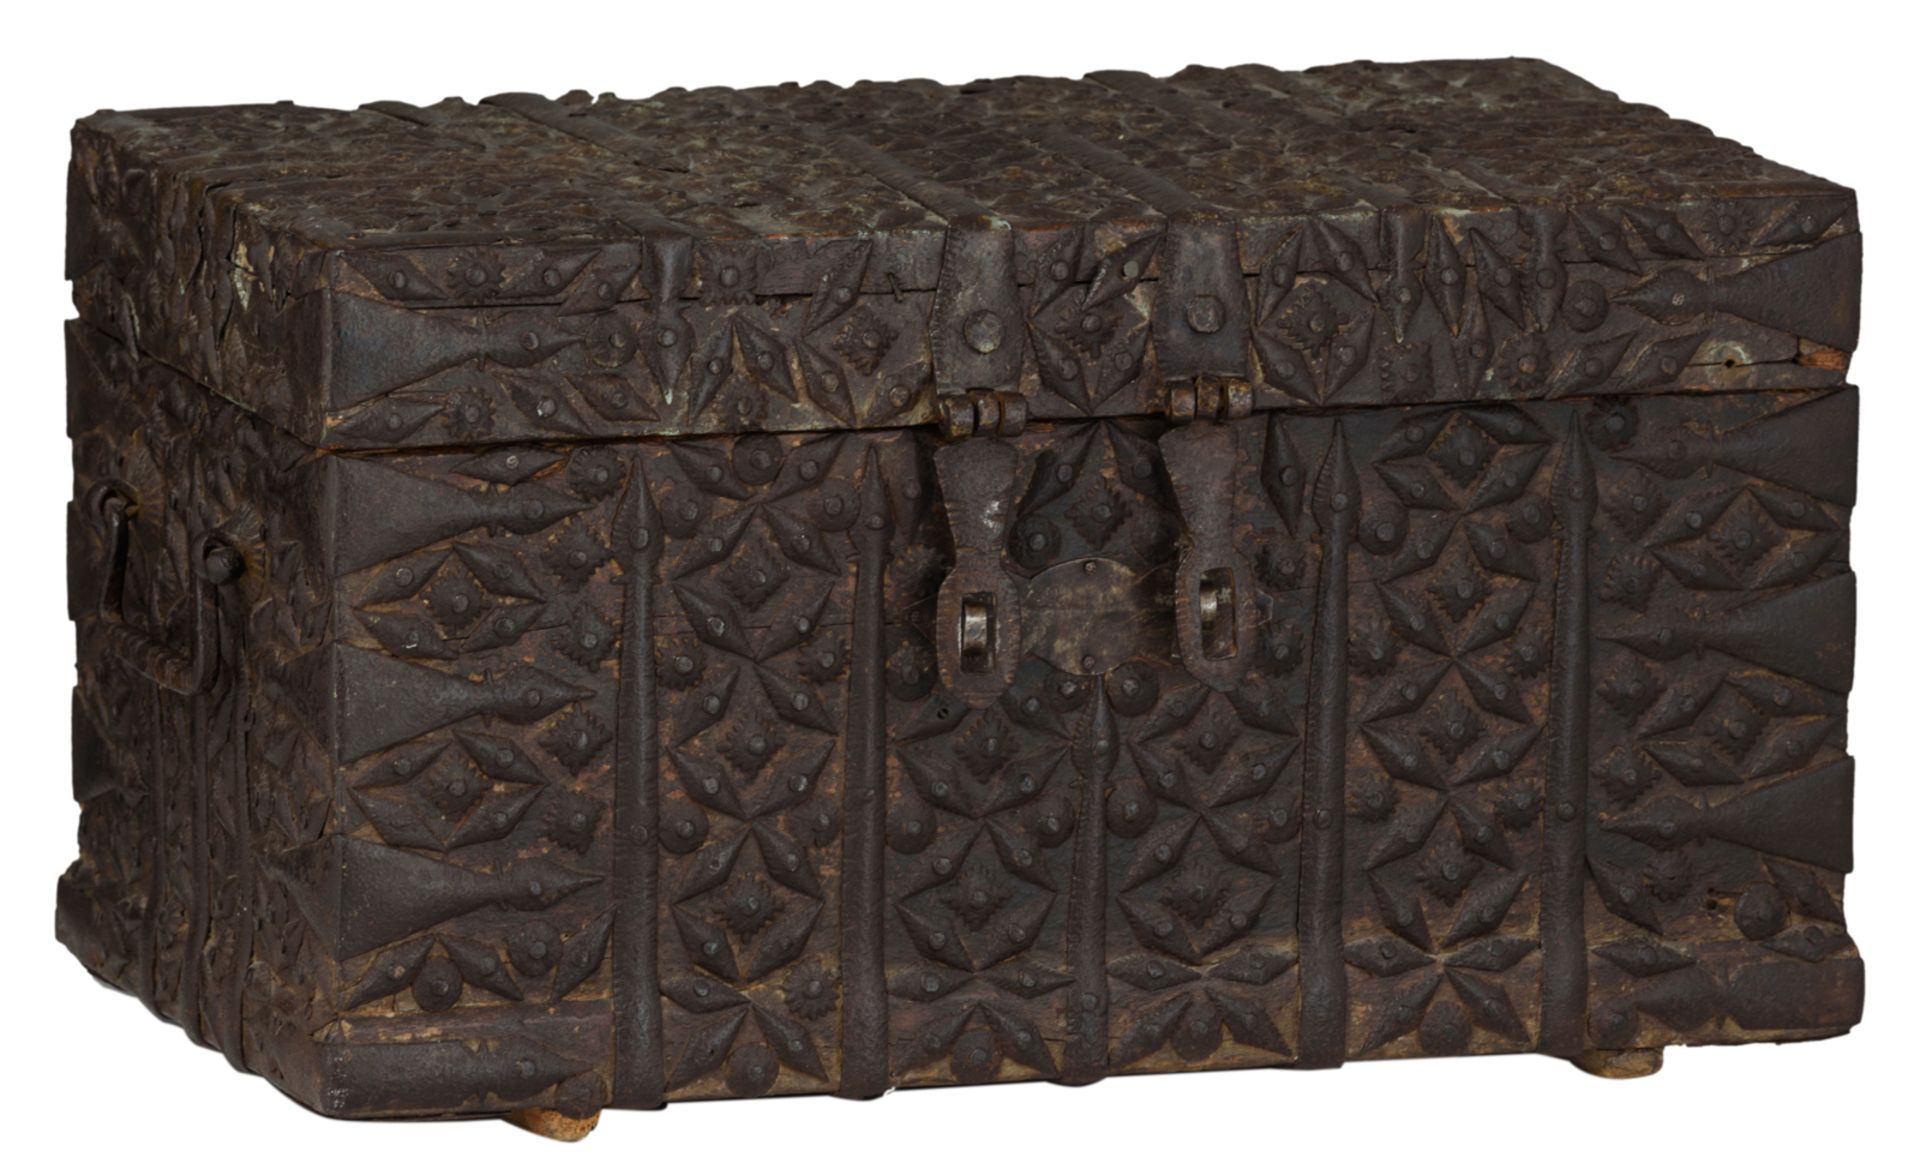 A Middle Eastern wooden chest with wrought iron fittings, H 20,5 - W 37 - D 20,5 cm